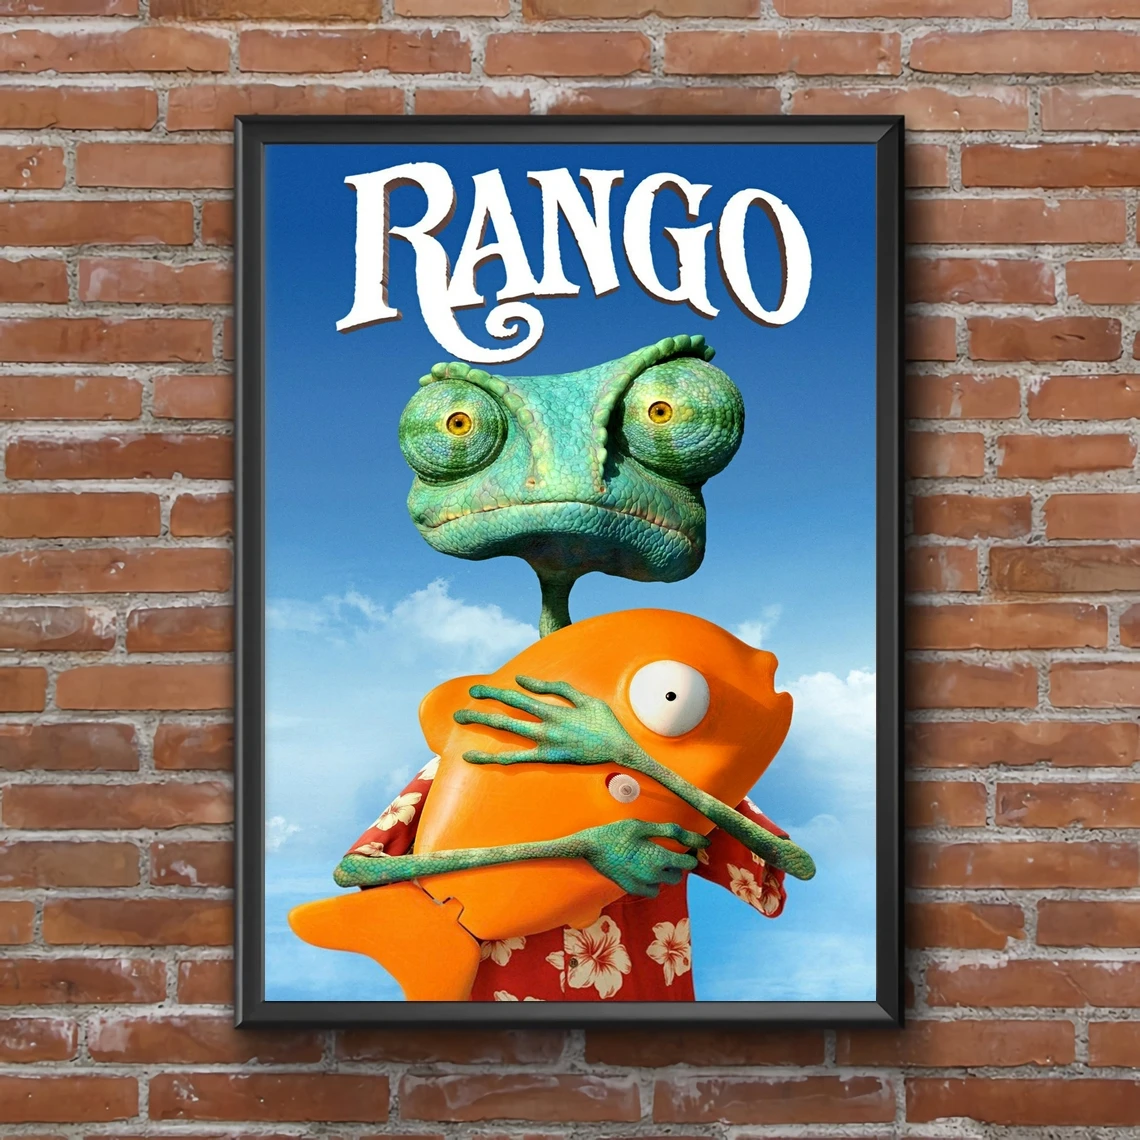 Rango Movie Poster Home Decor Classic Movie Cover Art Photo Canvas Poster  Print Wall Painting, No Frame - Painting & Calligraphy - AliExpress